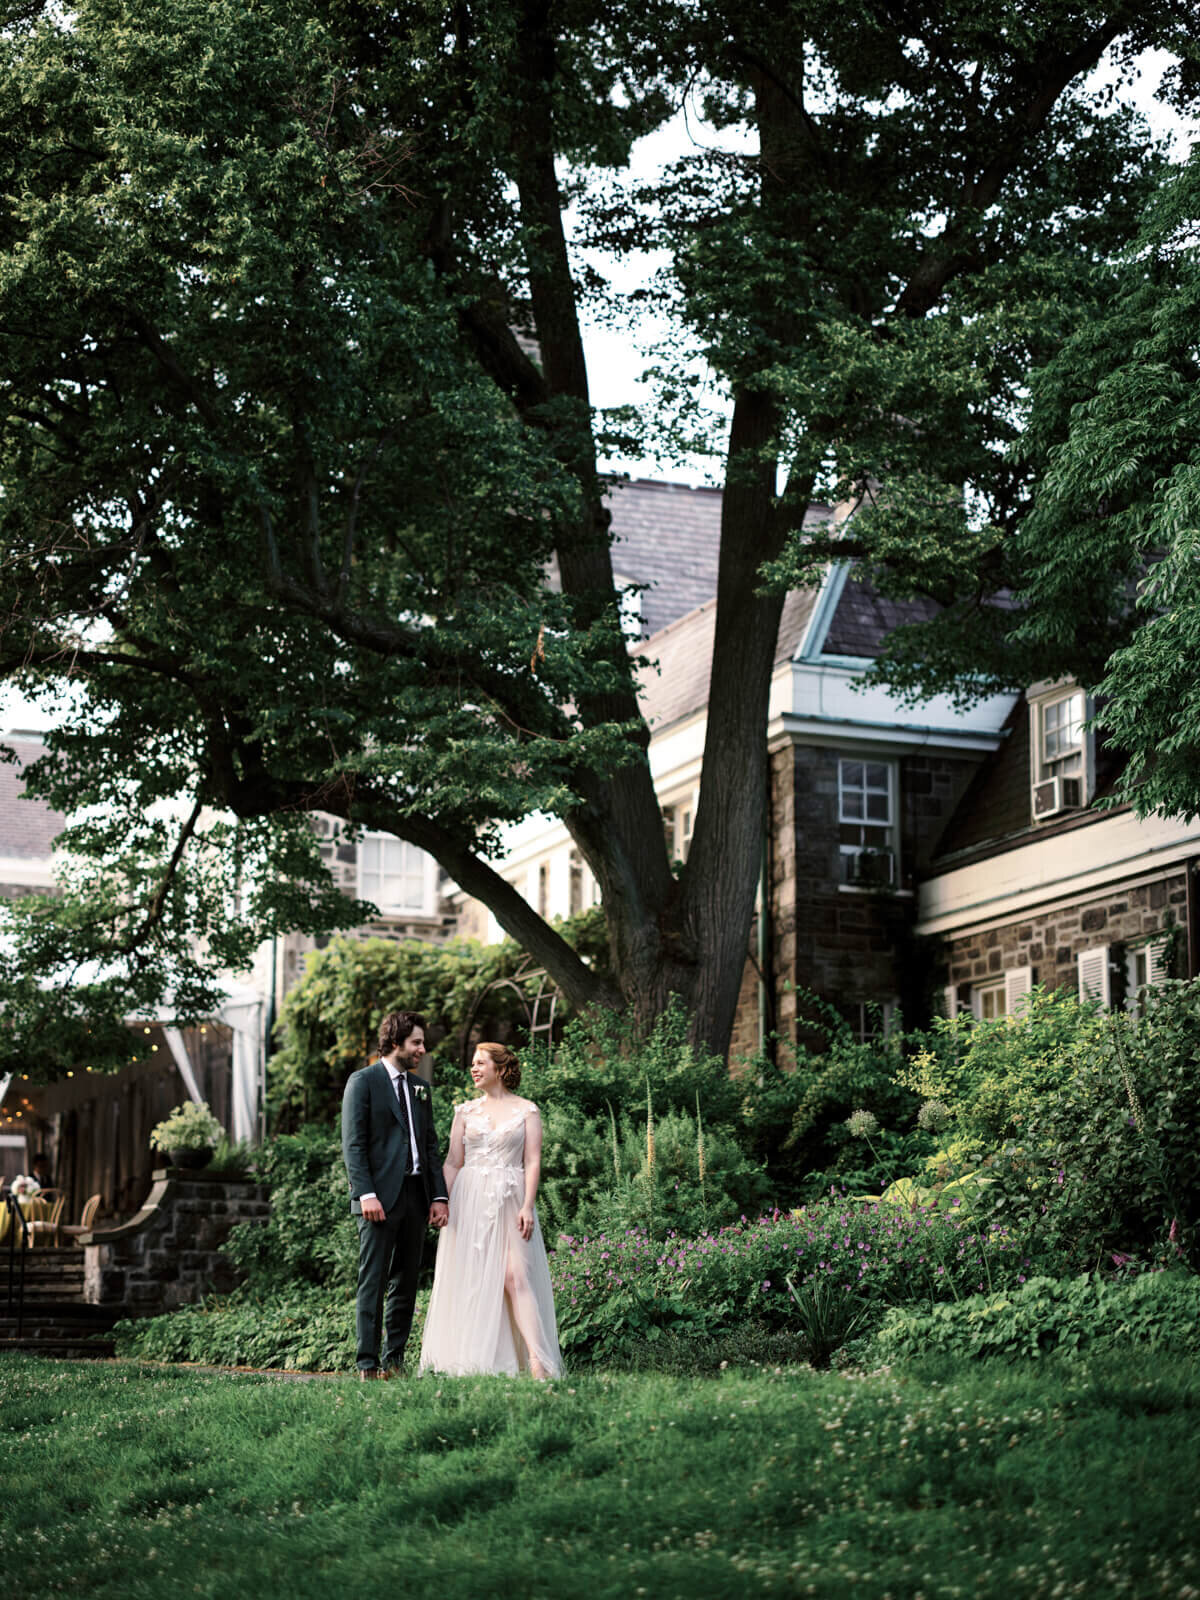 The bride and the groom are standing on a ground covered with grass, with a huge tree and a house on their back.